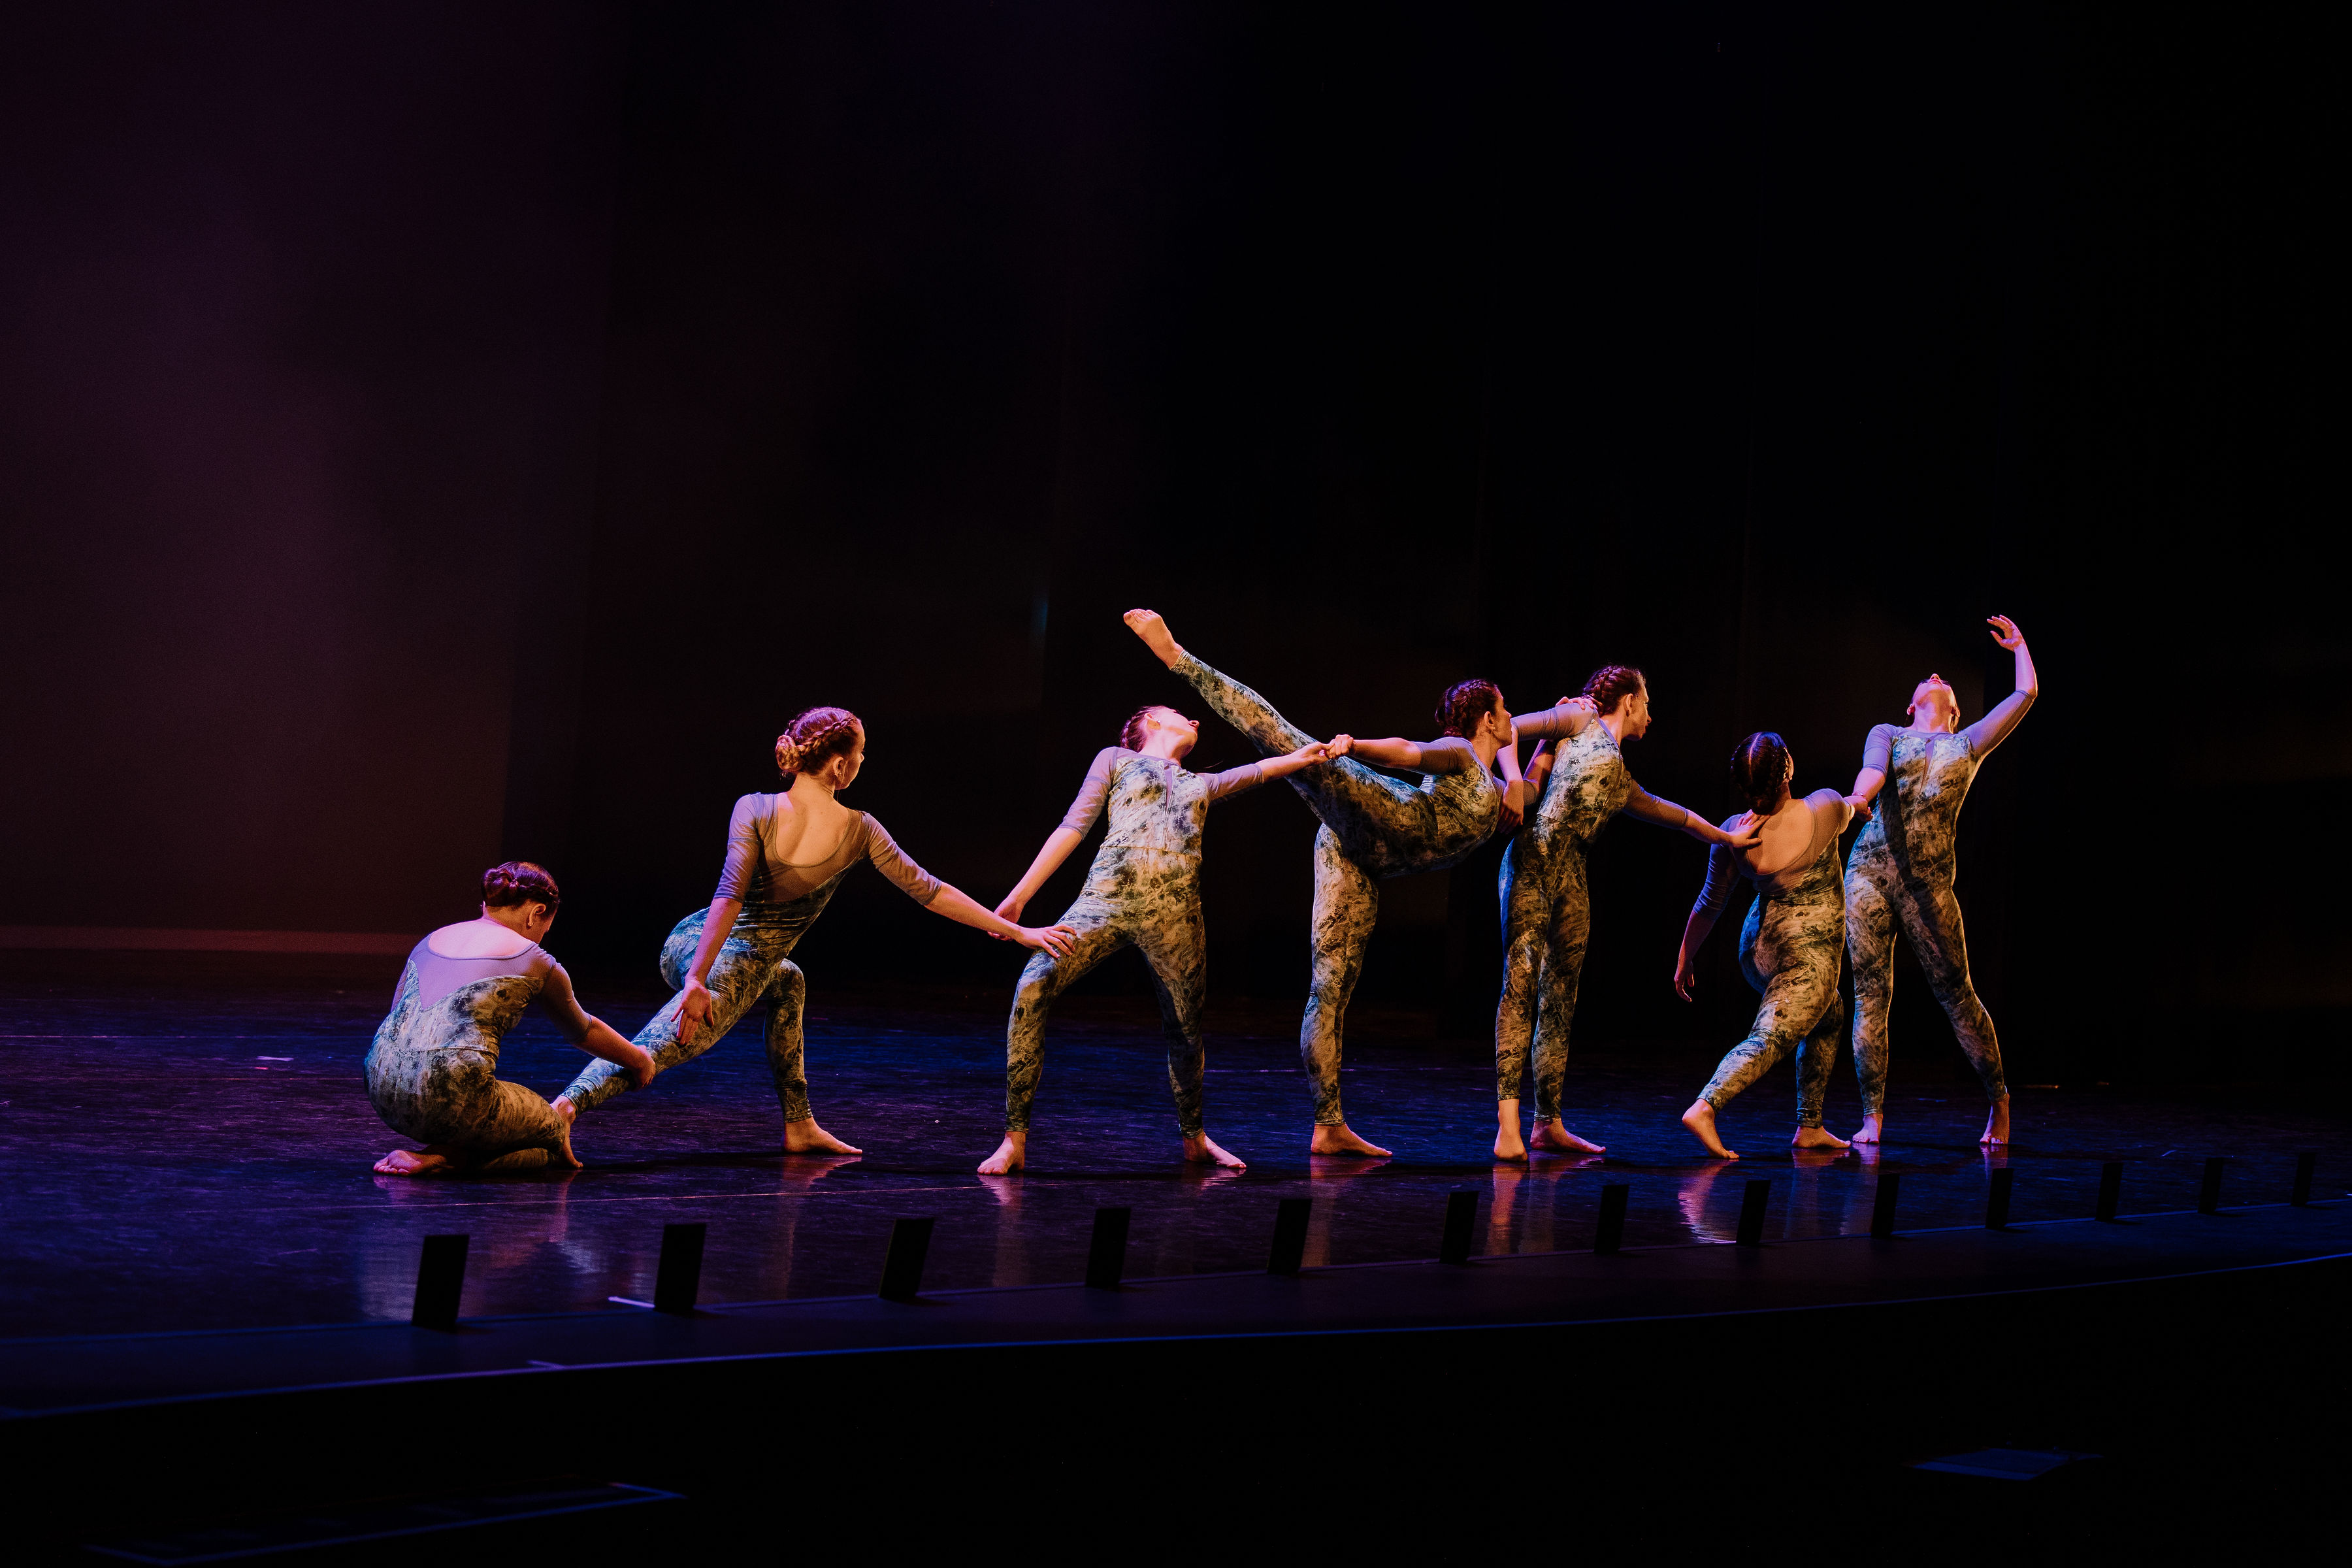 Large contemporary group dancing on stage